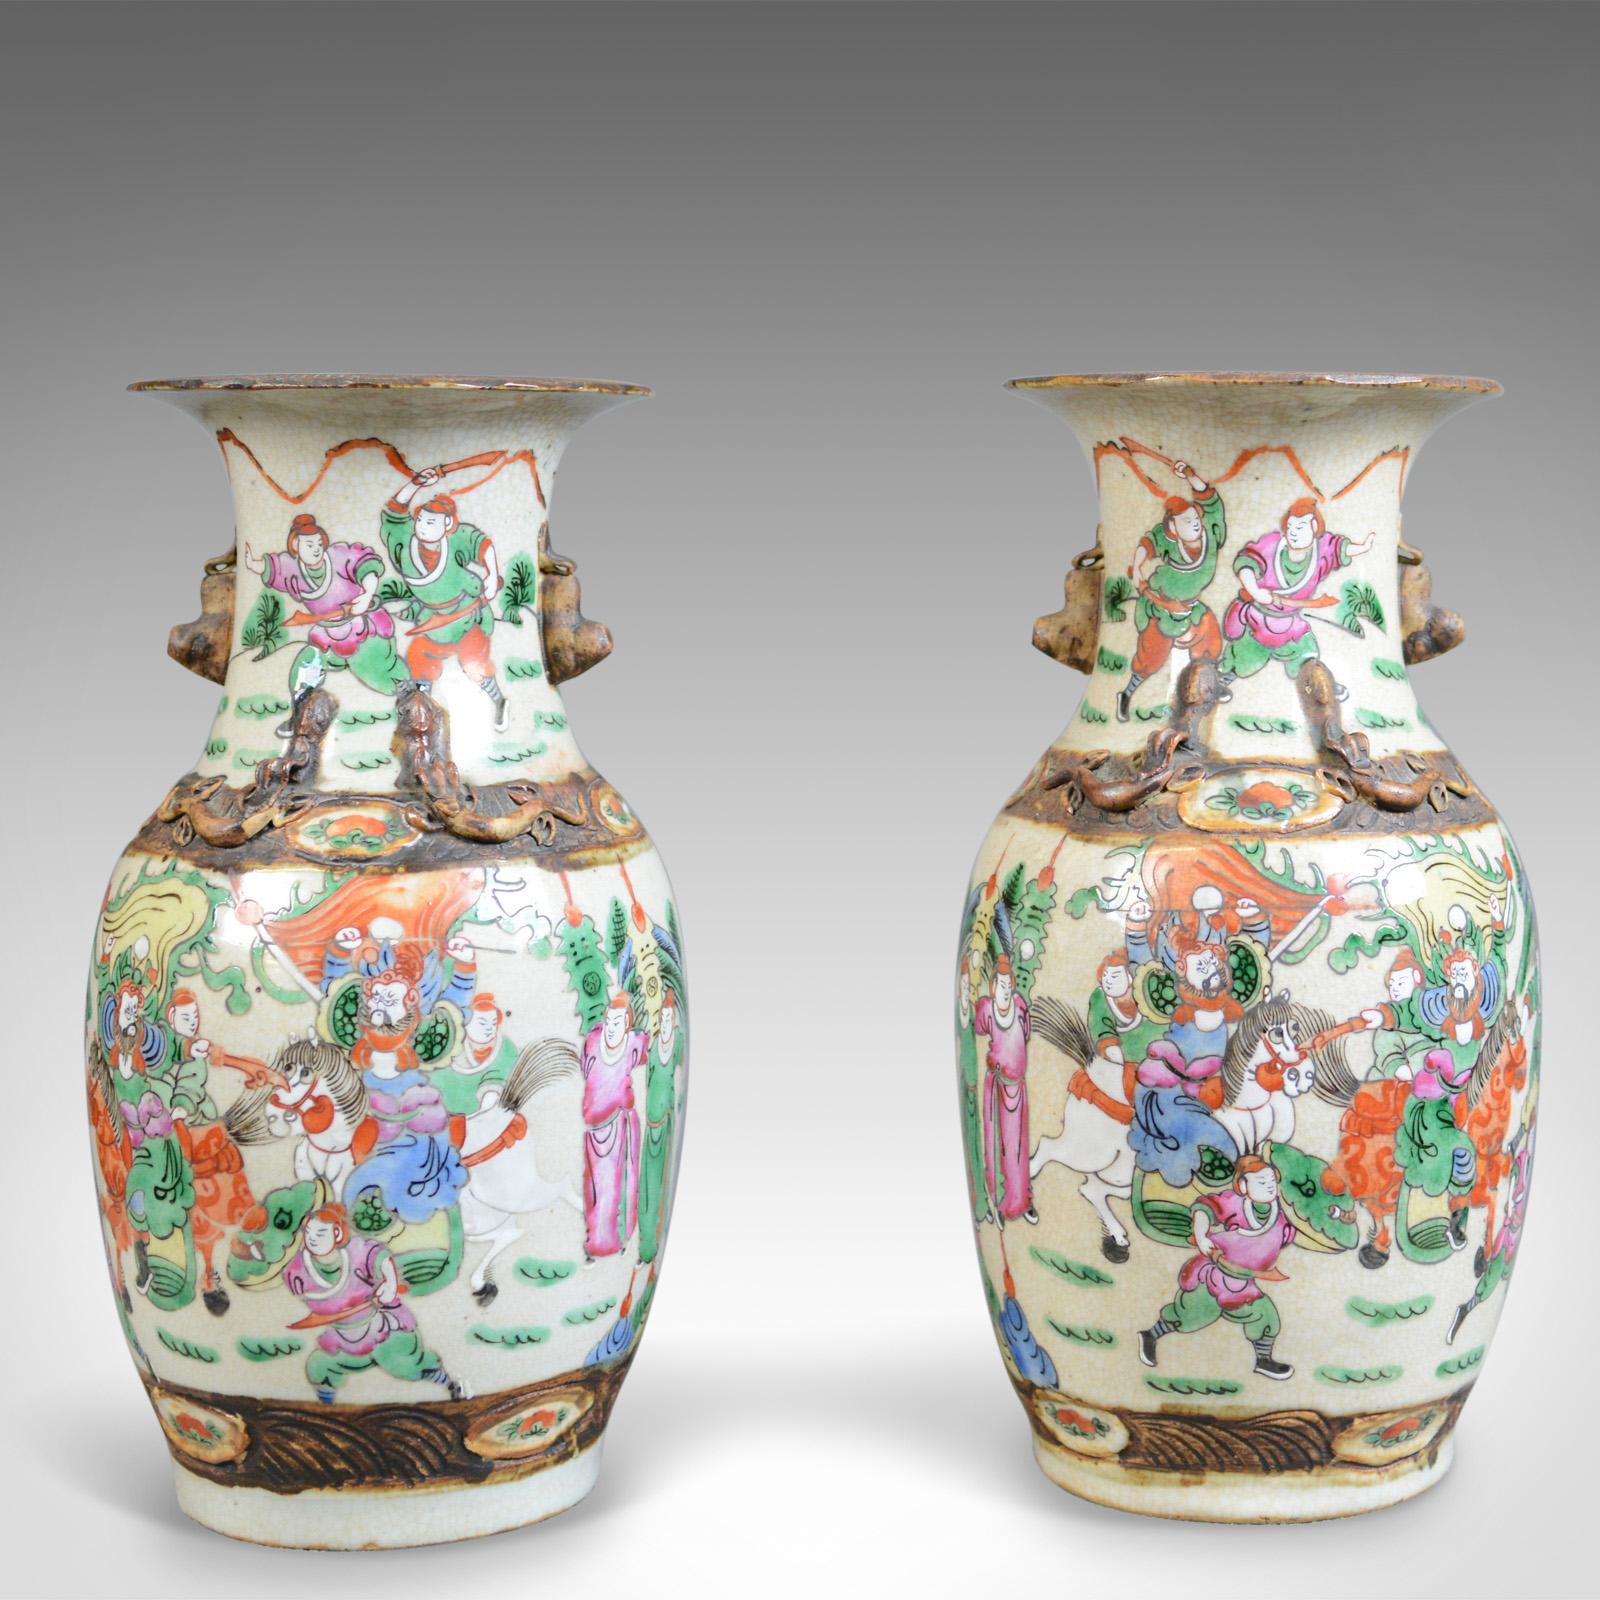 This is a midcentury pair of Chinese baluster vases, painted ceramic urns. 

Imposing quality pair of ceramic vases 
Profusely decorated in on a cream ground
Free from any damage or marks
Busy scenes of figures and horses in a pastel